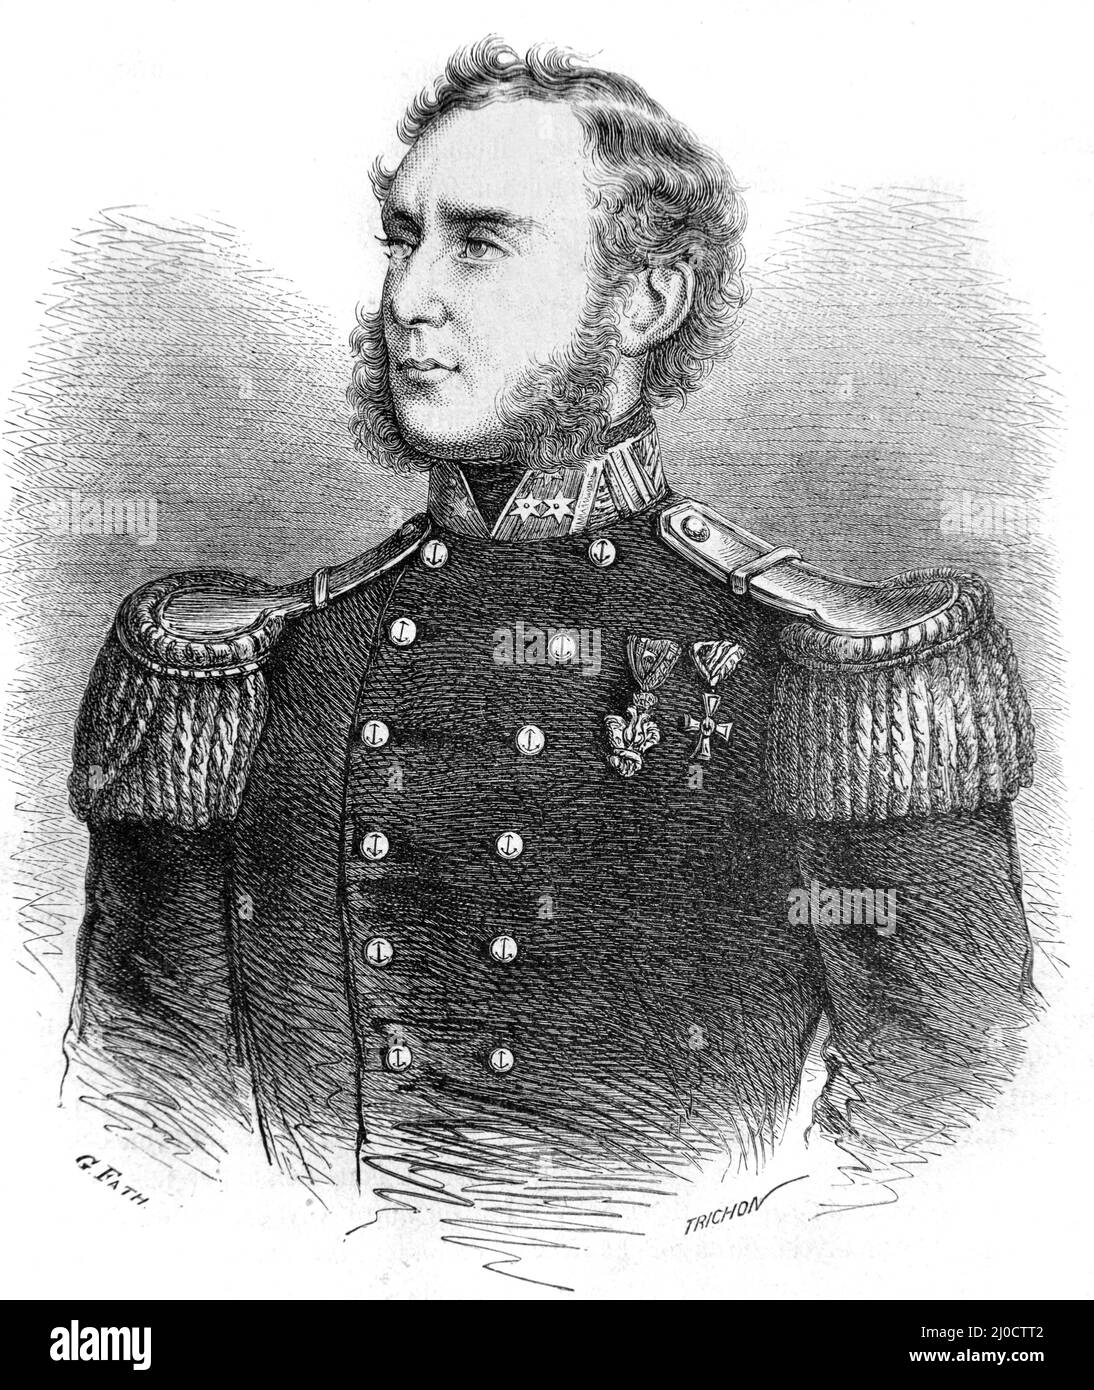 Portrait of Bernhard von Wüllerstorf-Urbair, von Wullersdorf-Urbair or von Wullerstorf und Urbair (1816-1883)  Austrian Captain of SMS Novara frigate during the Norvara Expedition (1857-59), Austrian Vice Admiral and Austrian Minister of Trade (1865-1867). Vintage Illustration or Engraving 1860. Stock Photo